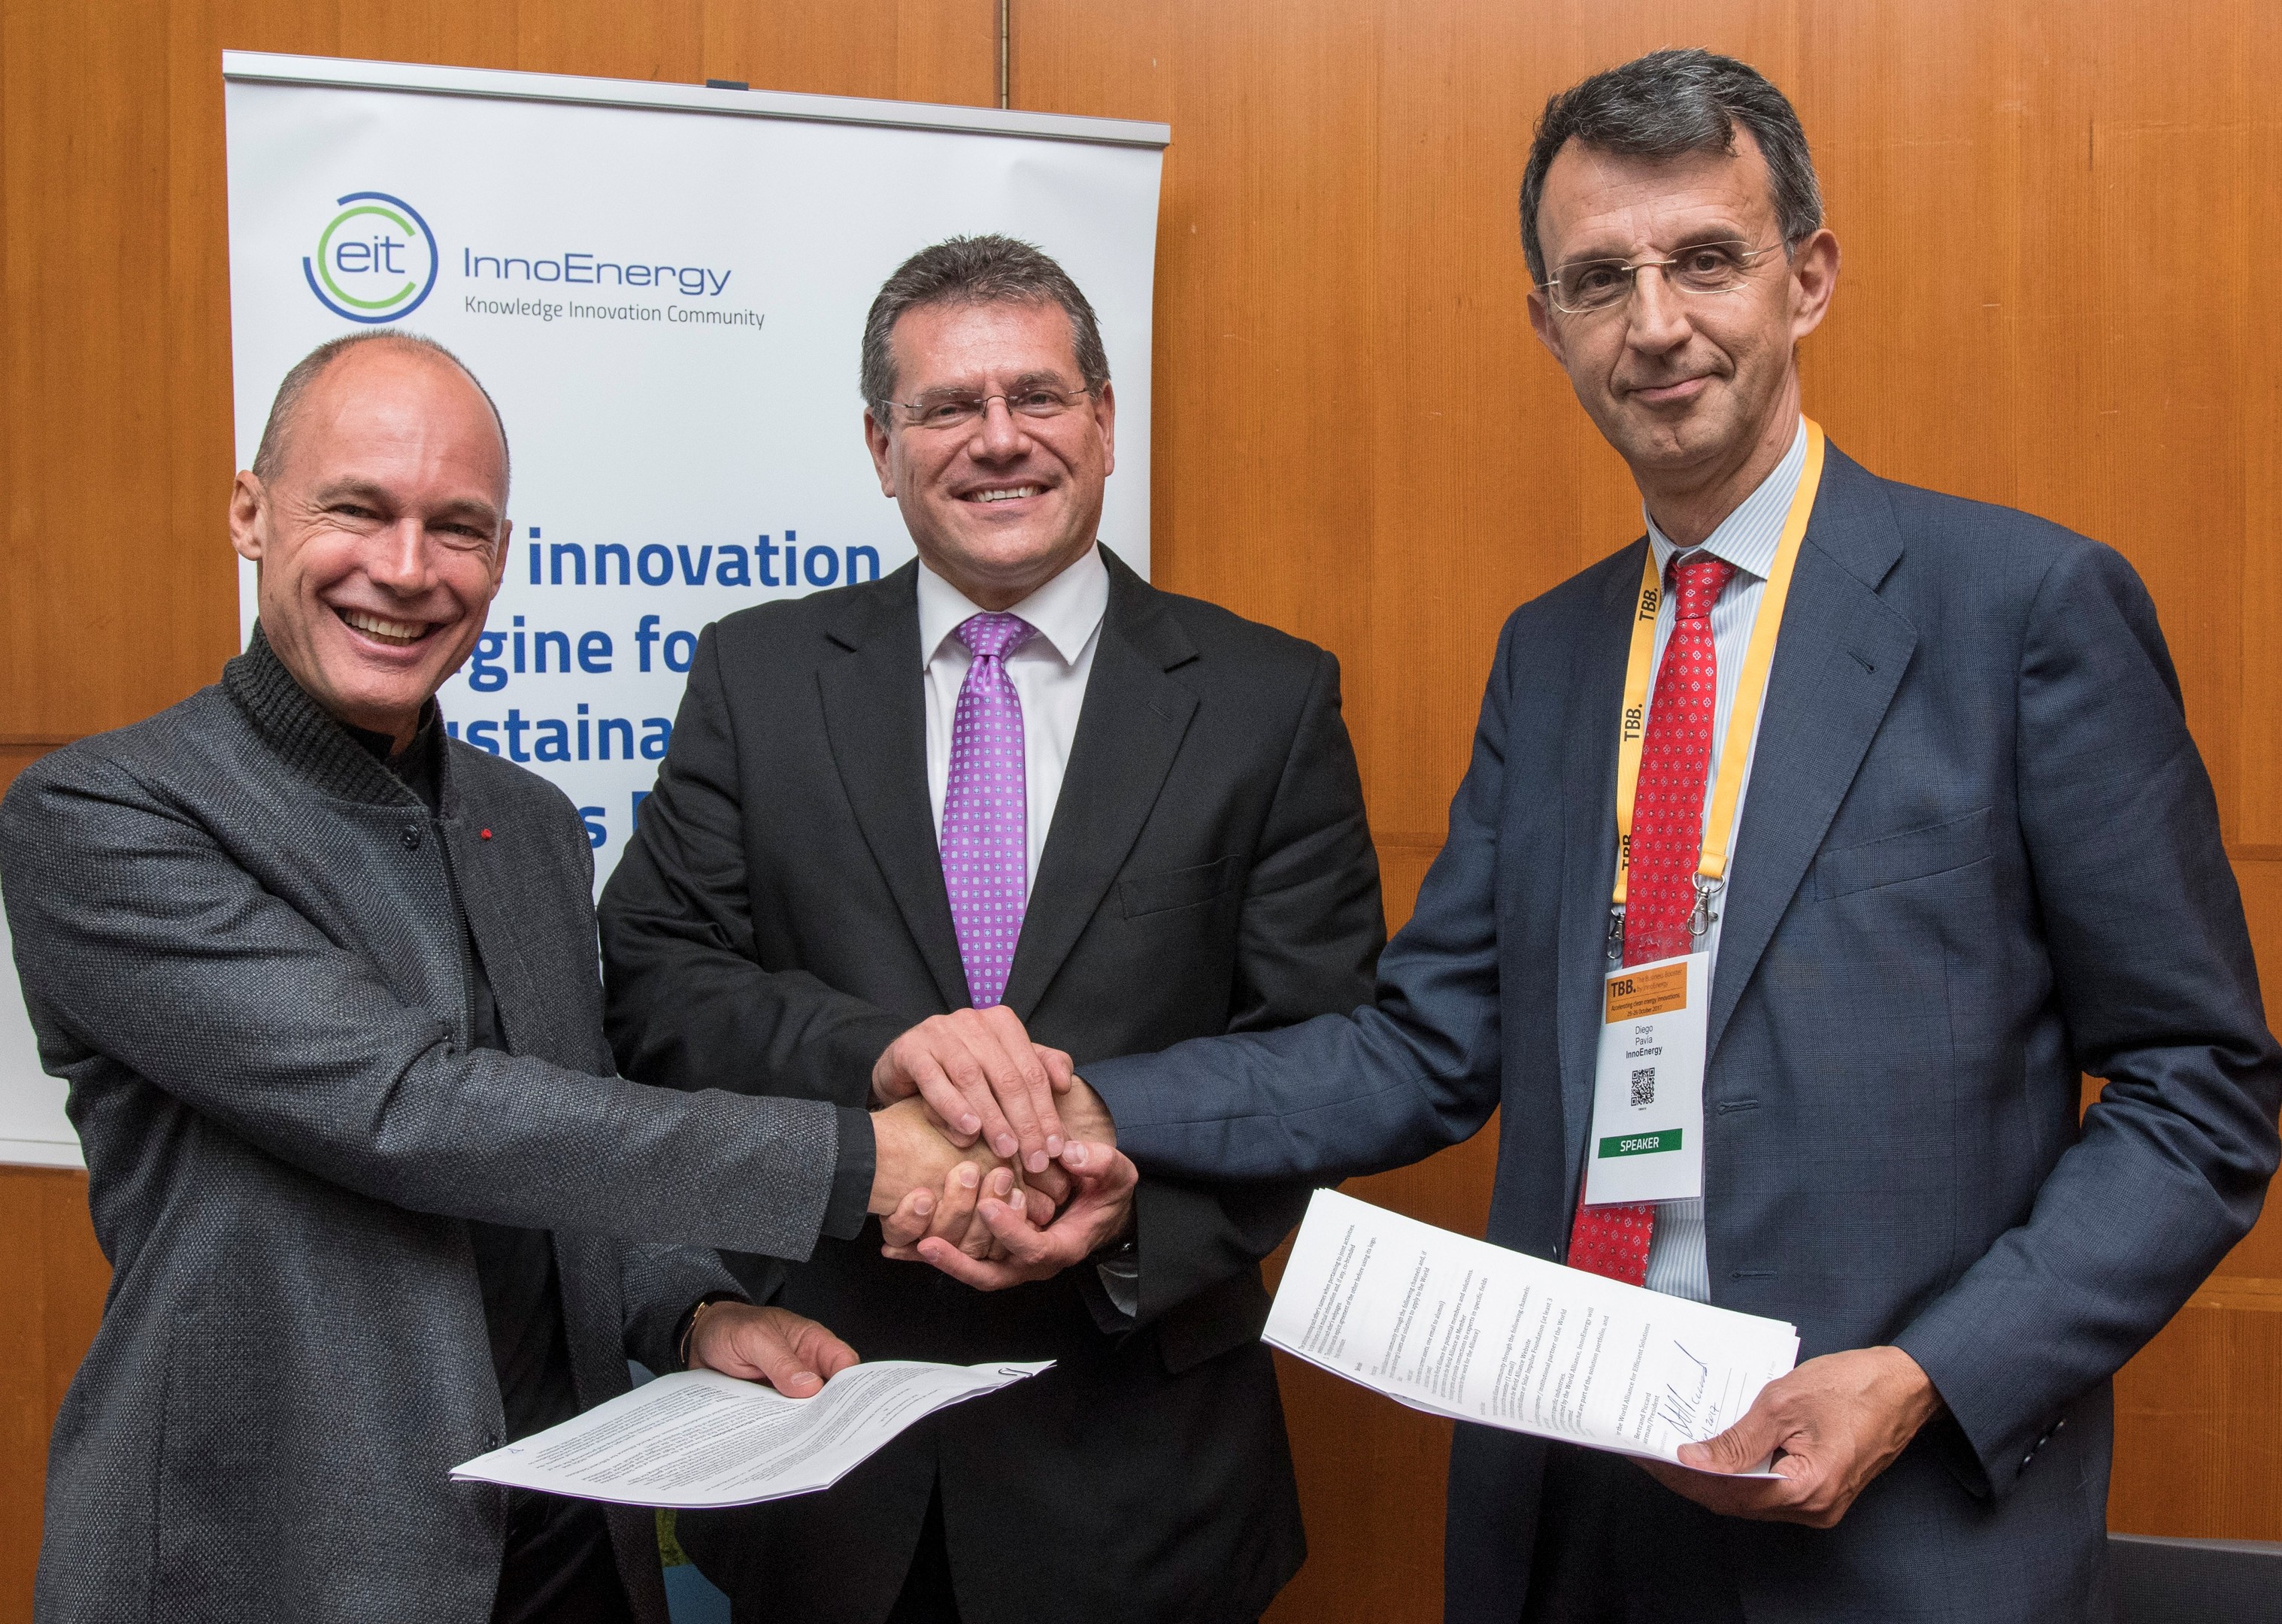 Maroš Šefčovič, Vice-President, European Commission, in charge of the Energy Union, Dr. Bertrand Piccard, Initiator Chairman, Solar Impulse Foundation (the sole World Alliance backer)
and Diego Pavia, CEO, InnoEnergy.